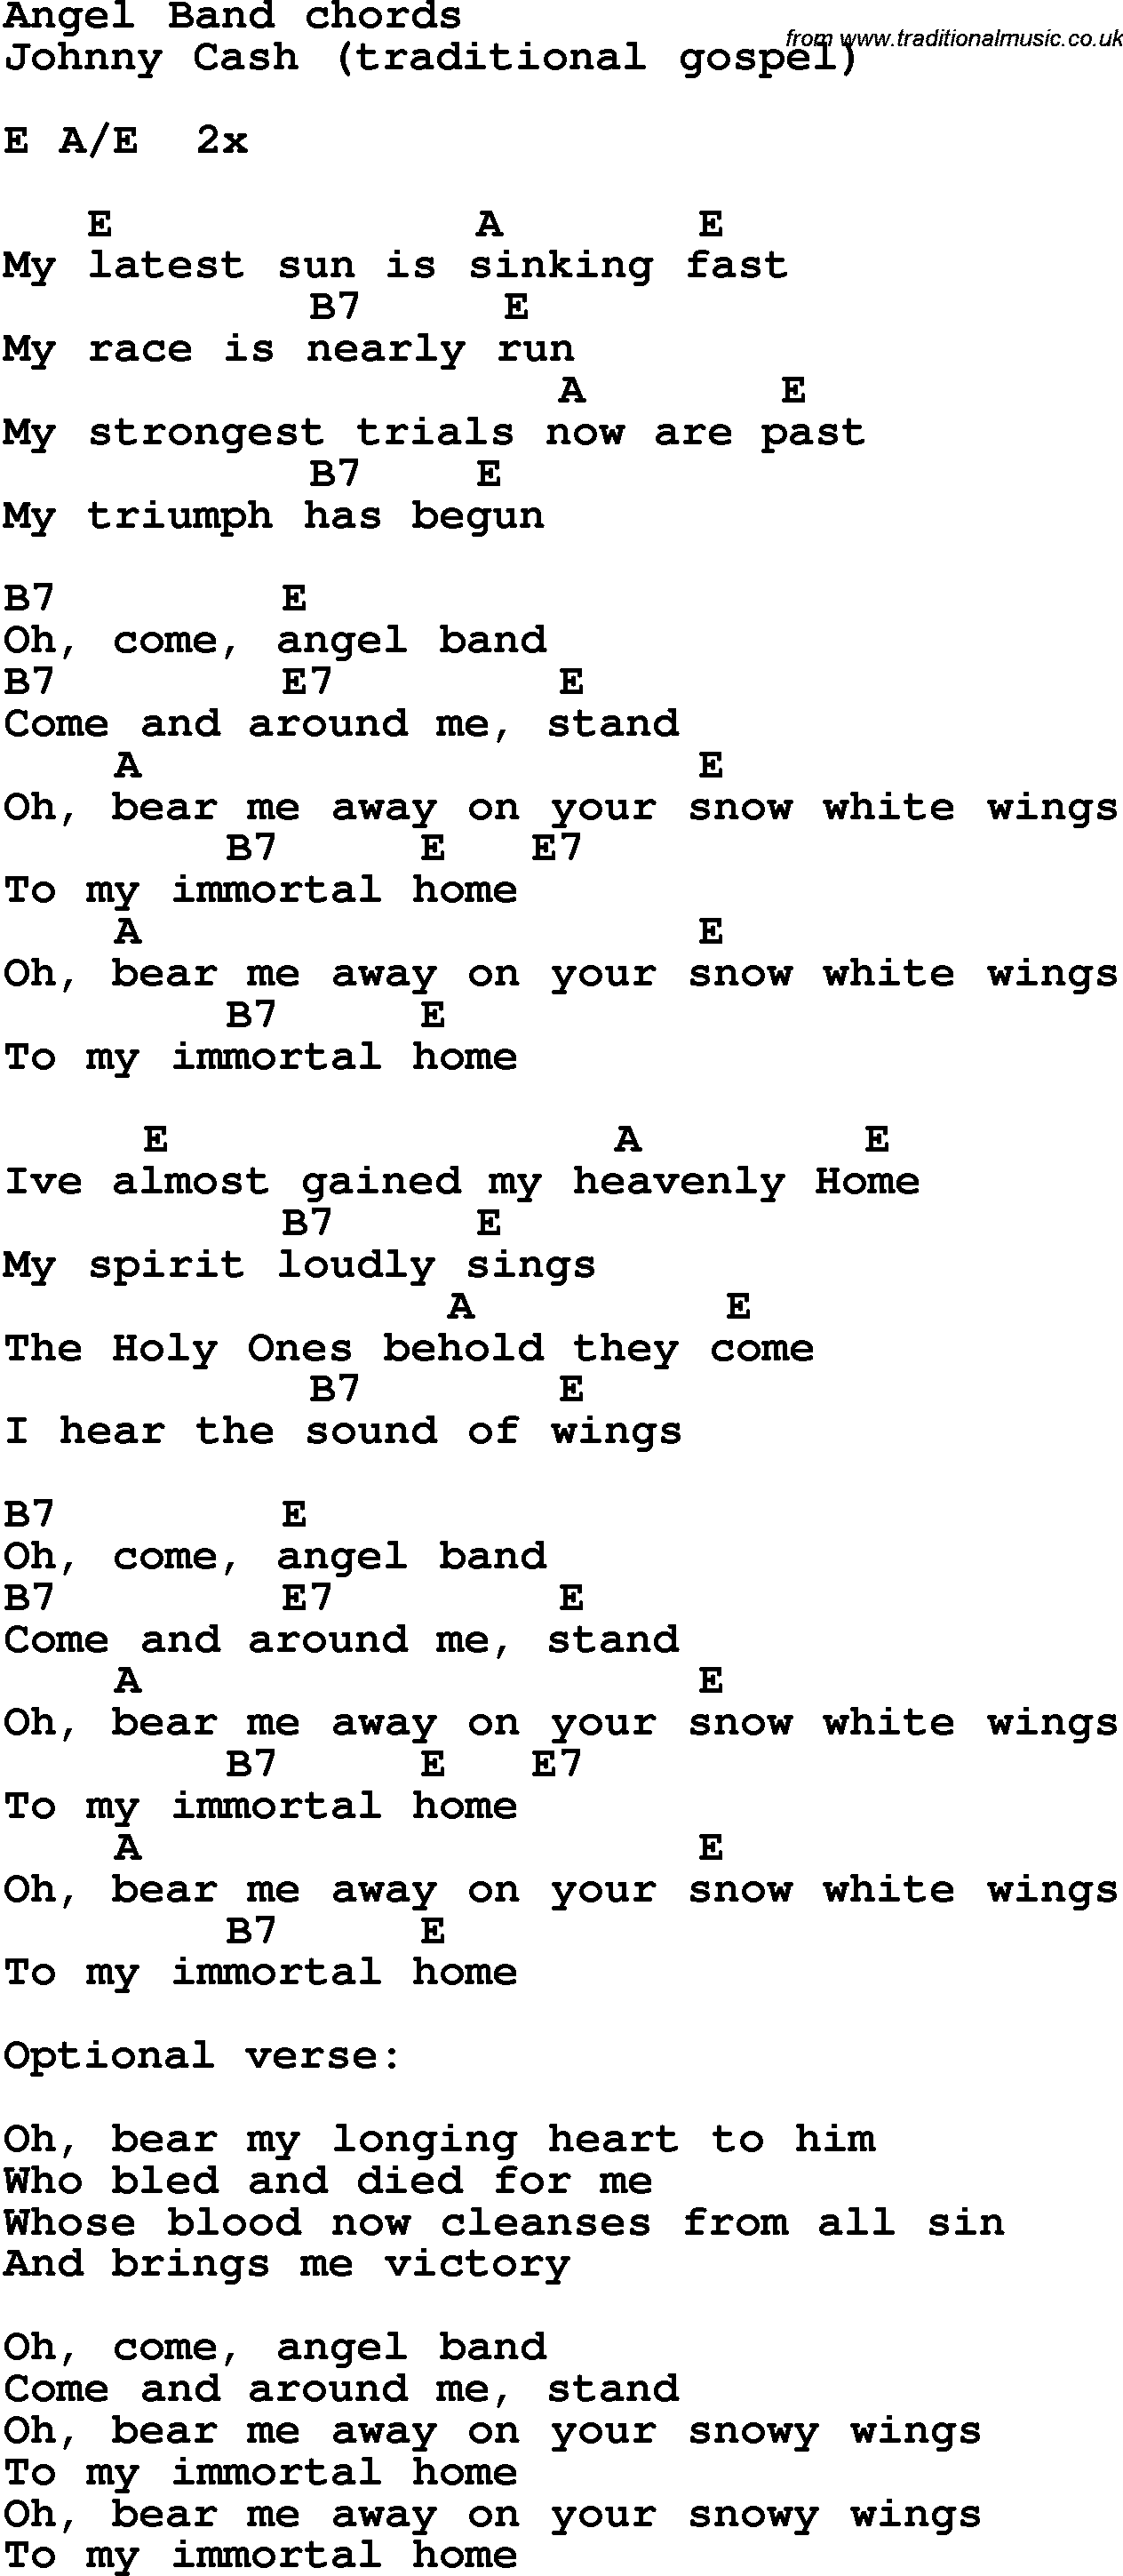 Song Lyrics with guitar chords for Angel Band - Johnny Cash